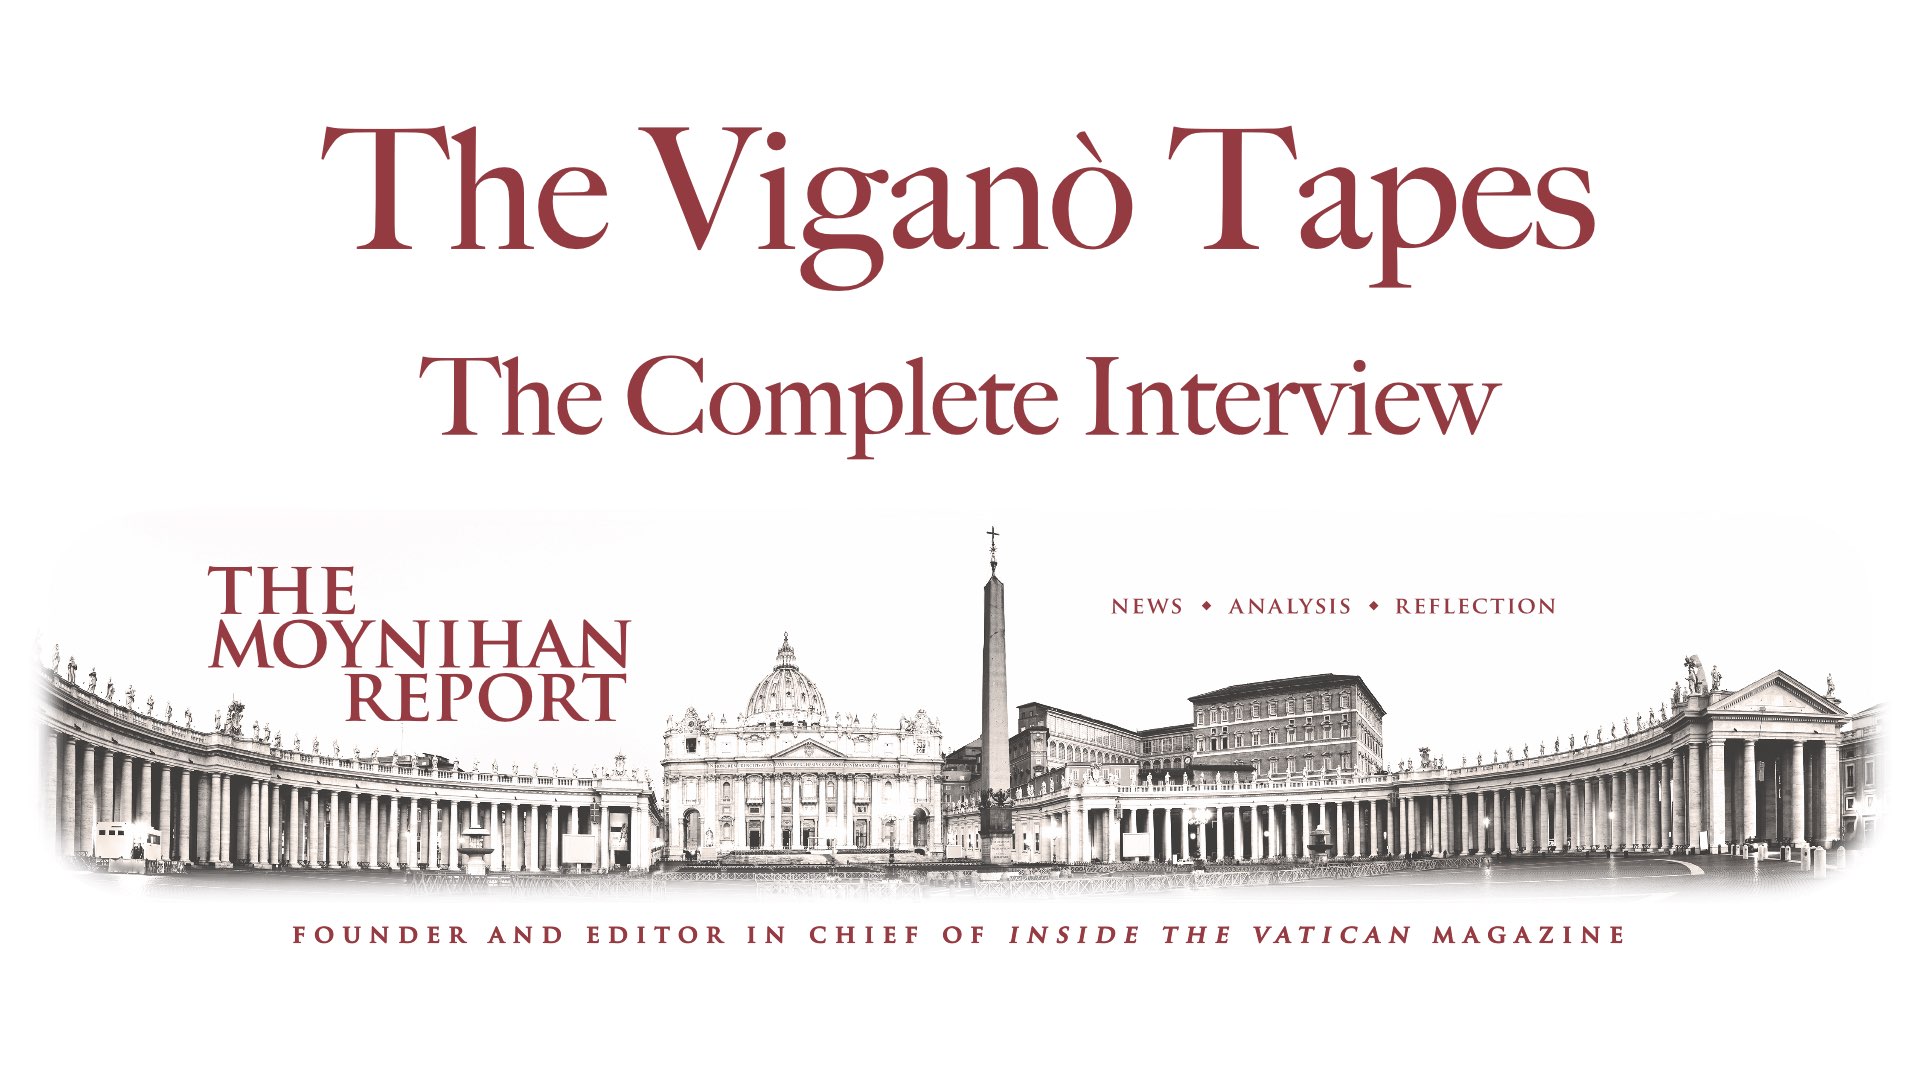 The Vigano Tapes - Inside The Vatican